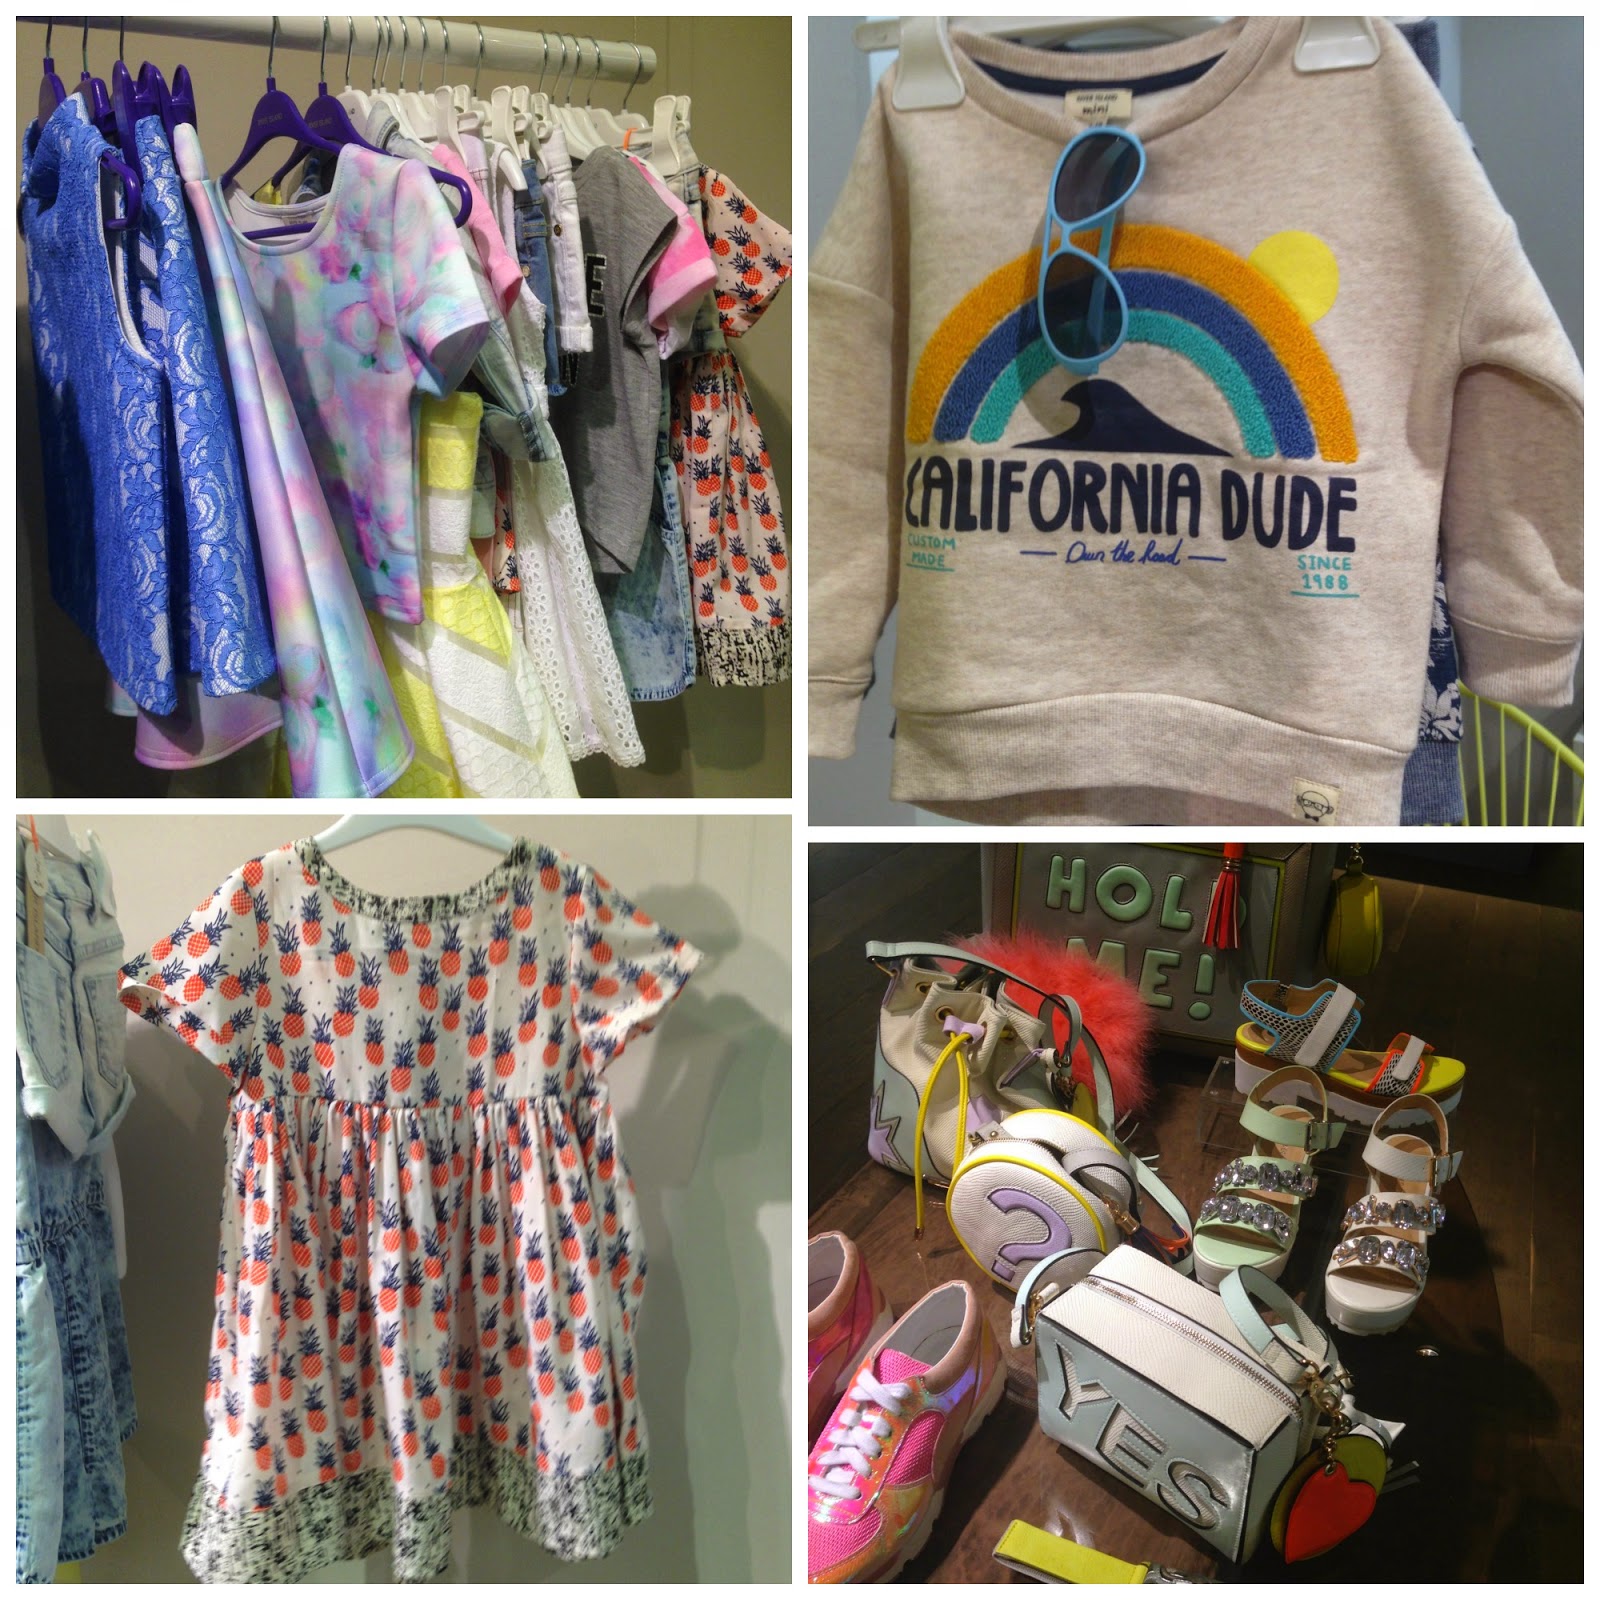 mamasVIB - A sneaky peak at S/S 2015 - and what we have our eyes on! | Mothercare | Little Bird | Jools Oliver | Marks & Spencer | Little Royals | new collection | new season | spring summer 15 | press shows | river island mini | cath kidston | monsoon | Boden | boden mini | clothes |kids fashion | bonita turner | stylist | mamasVIB | new collections | sneak peak at spring | new | kids style | ss15 | blogger | mummy bloggers | 